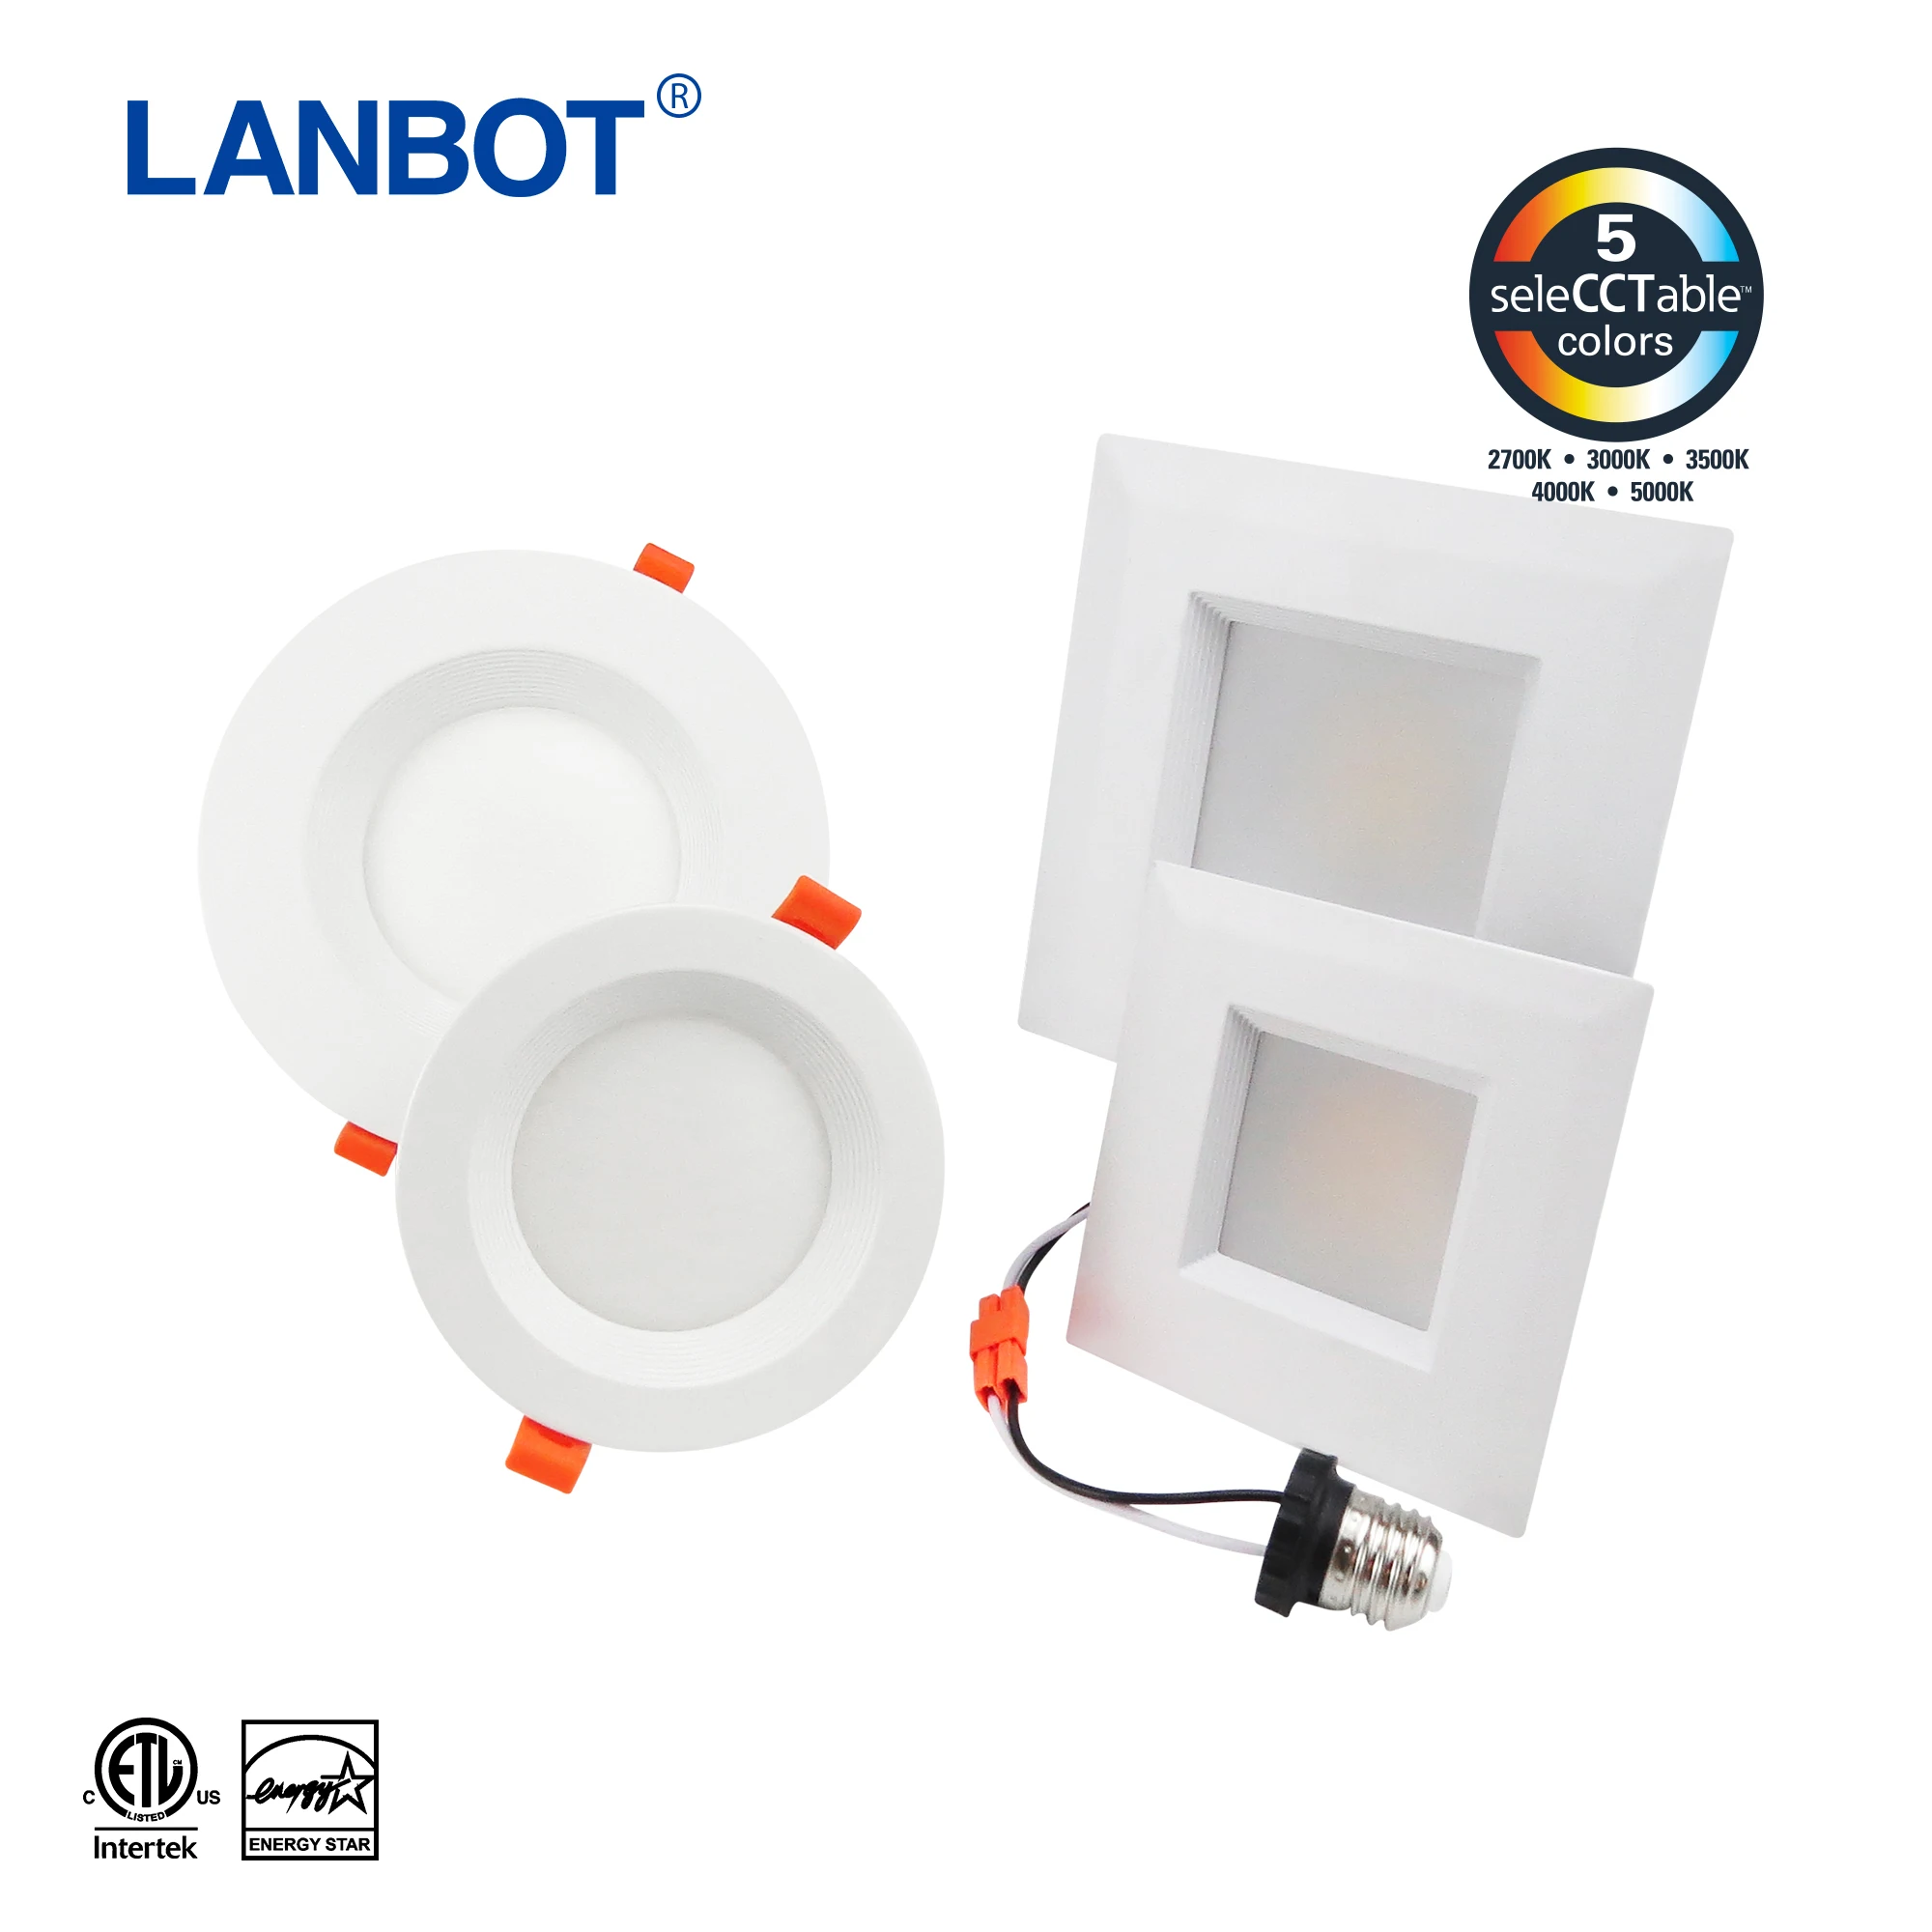 LANBOT 6 8 10 Inch LED Downlight with Smooth Trim Retrofit LED Recessed Lighting Fixture 2700K Soft White